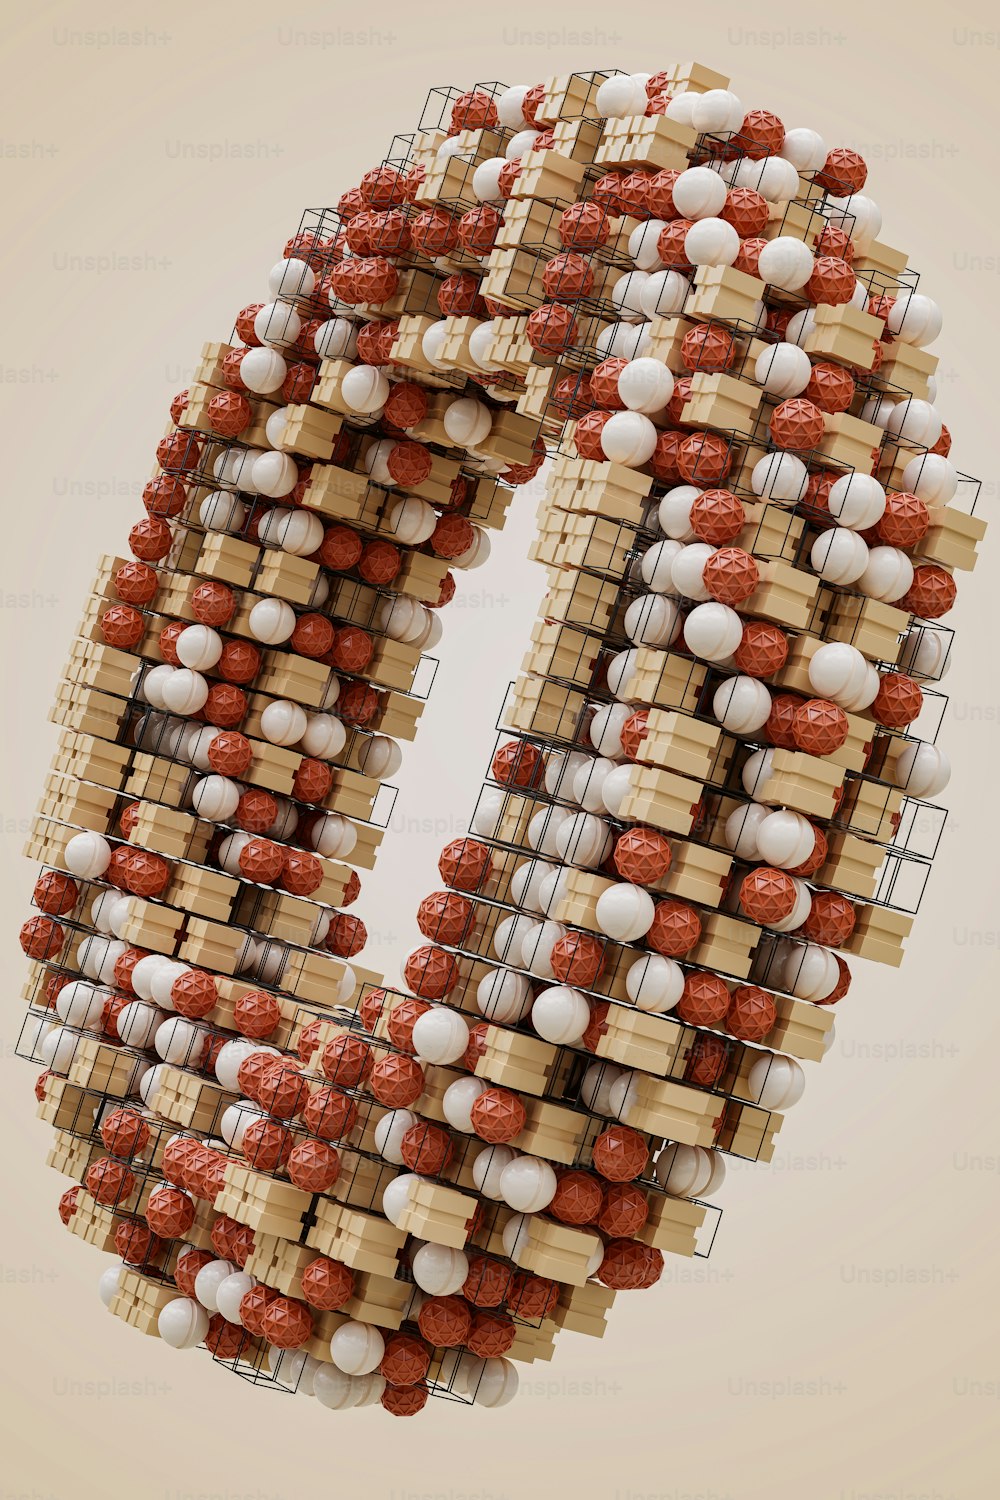 a letter made out of wooden blocks and balls